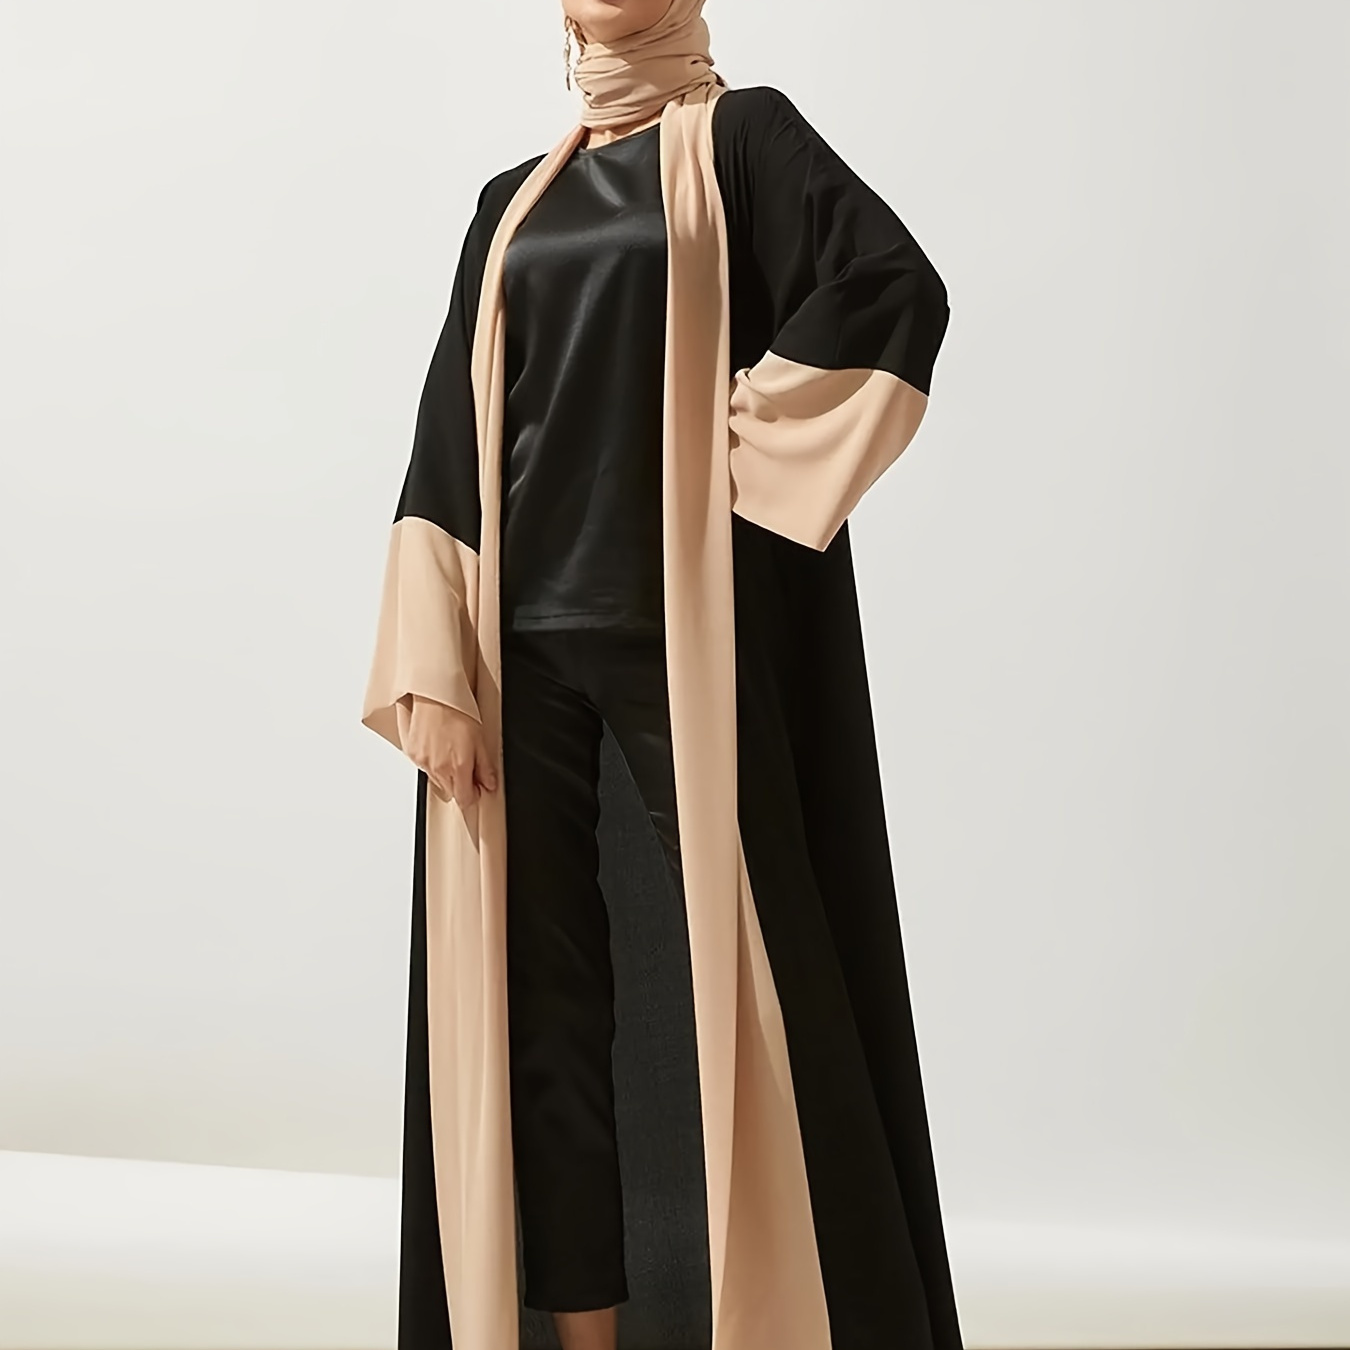 

Contrast Trim Open Front Modest Outwear, Elegant Long Sleeve Maxi Length Cover Up, Women's Clothing